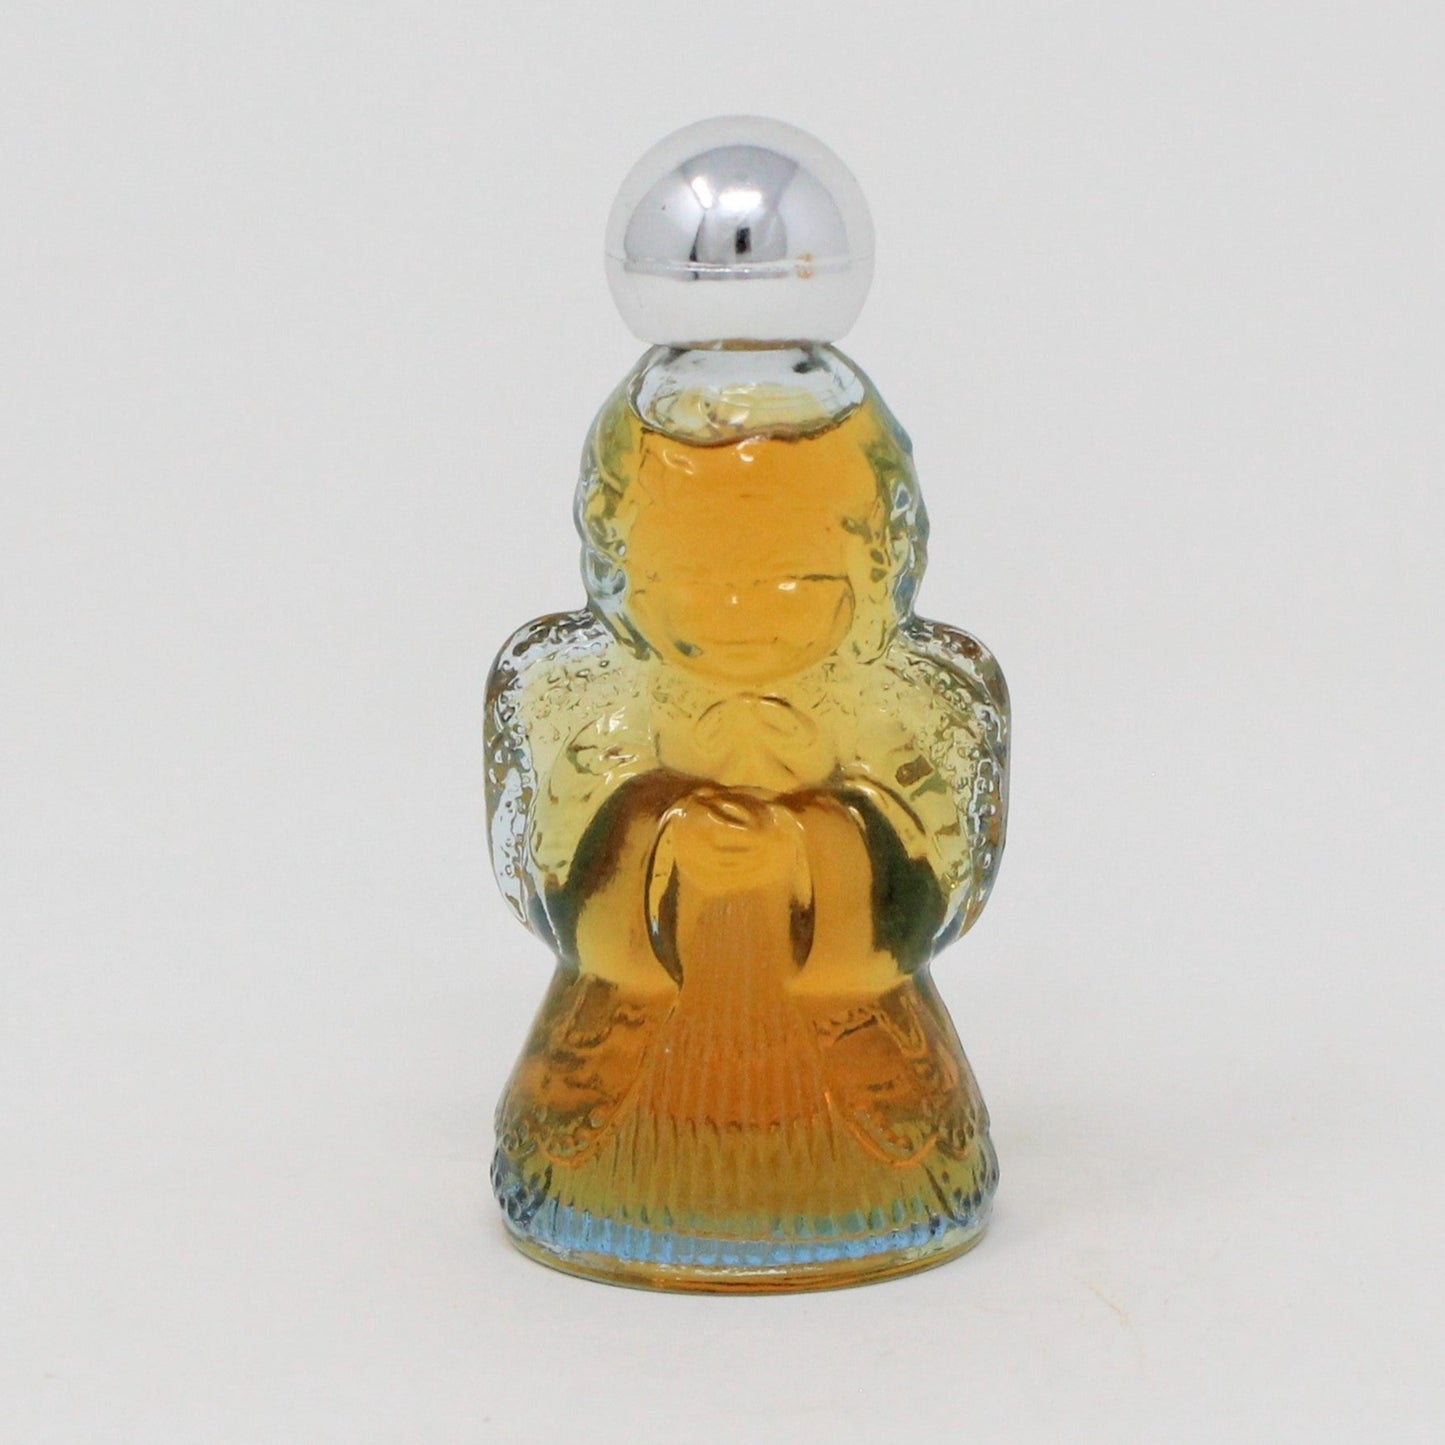 Perfume Bottle, Avon, Mini Heavenly Angel, Full Timeless Ultra Cologne, Vintage Collectible